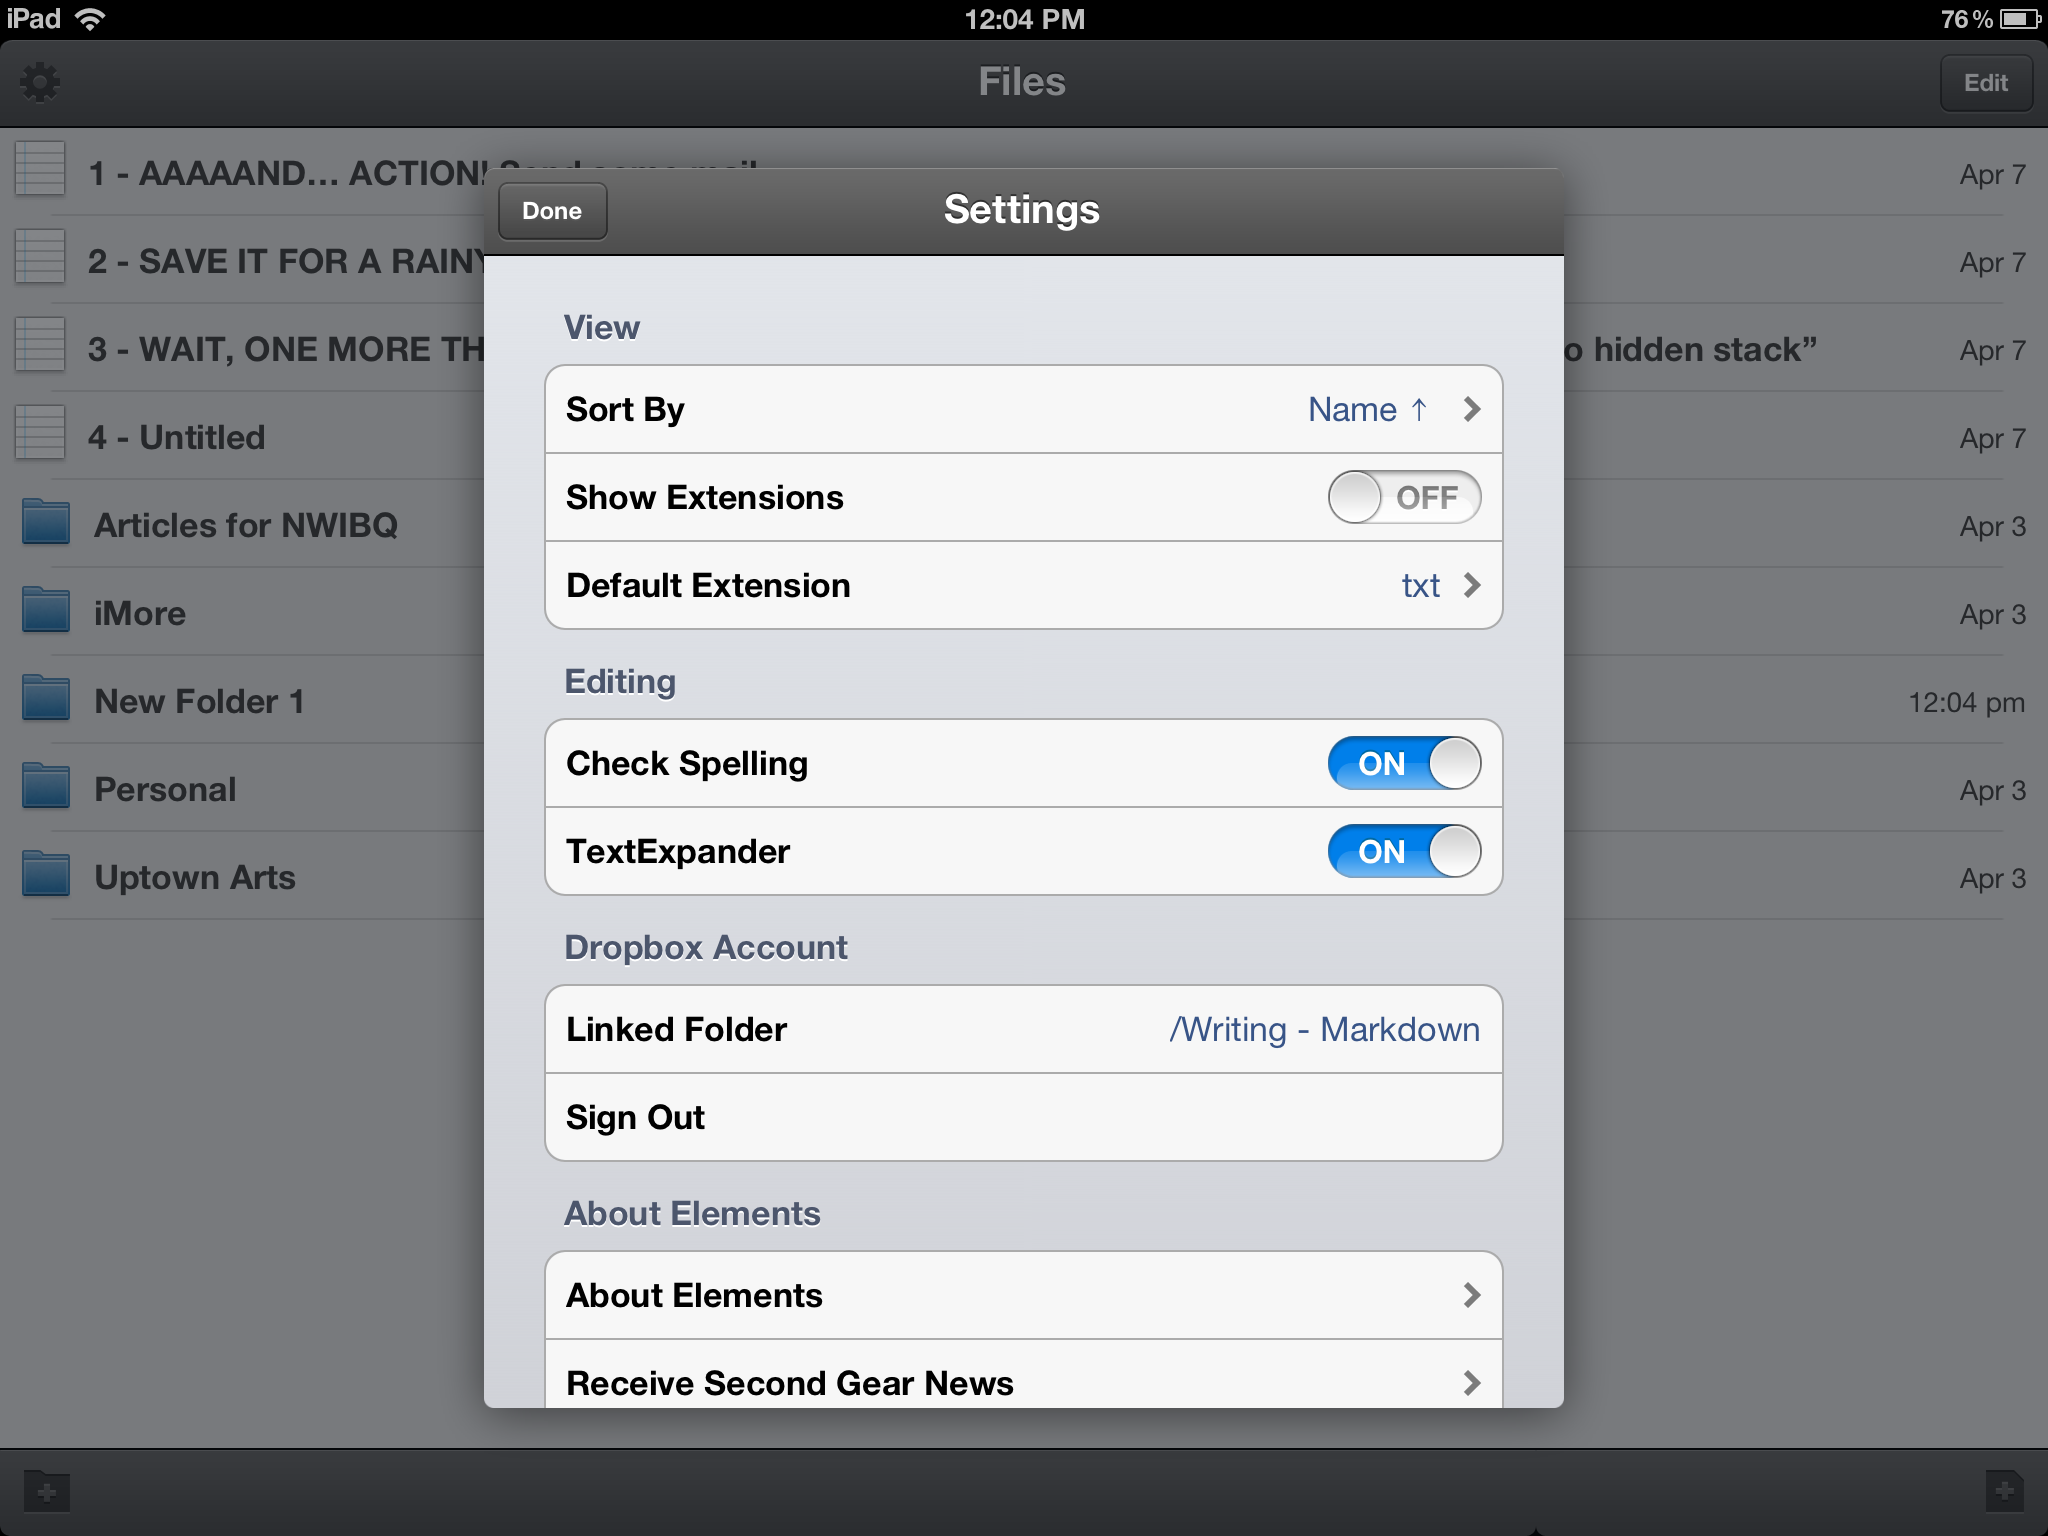 Elements allows you to change the default directory to save documents to on your iPad